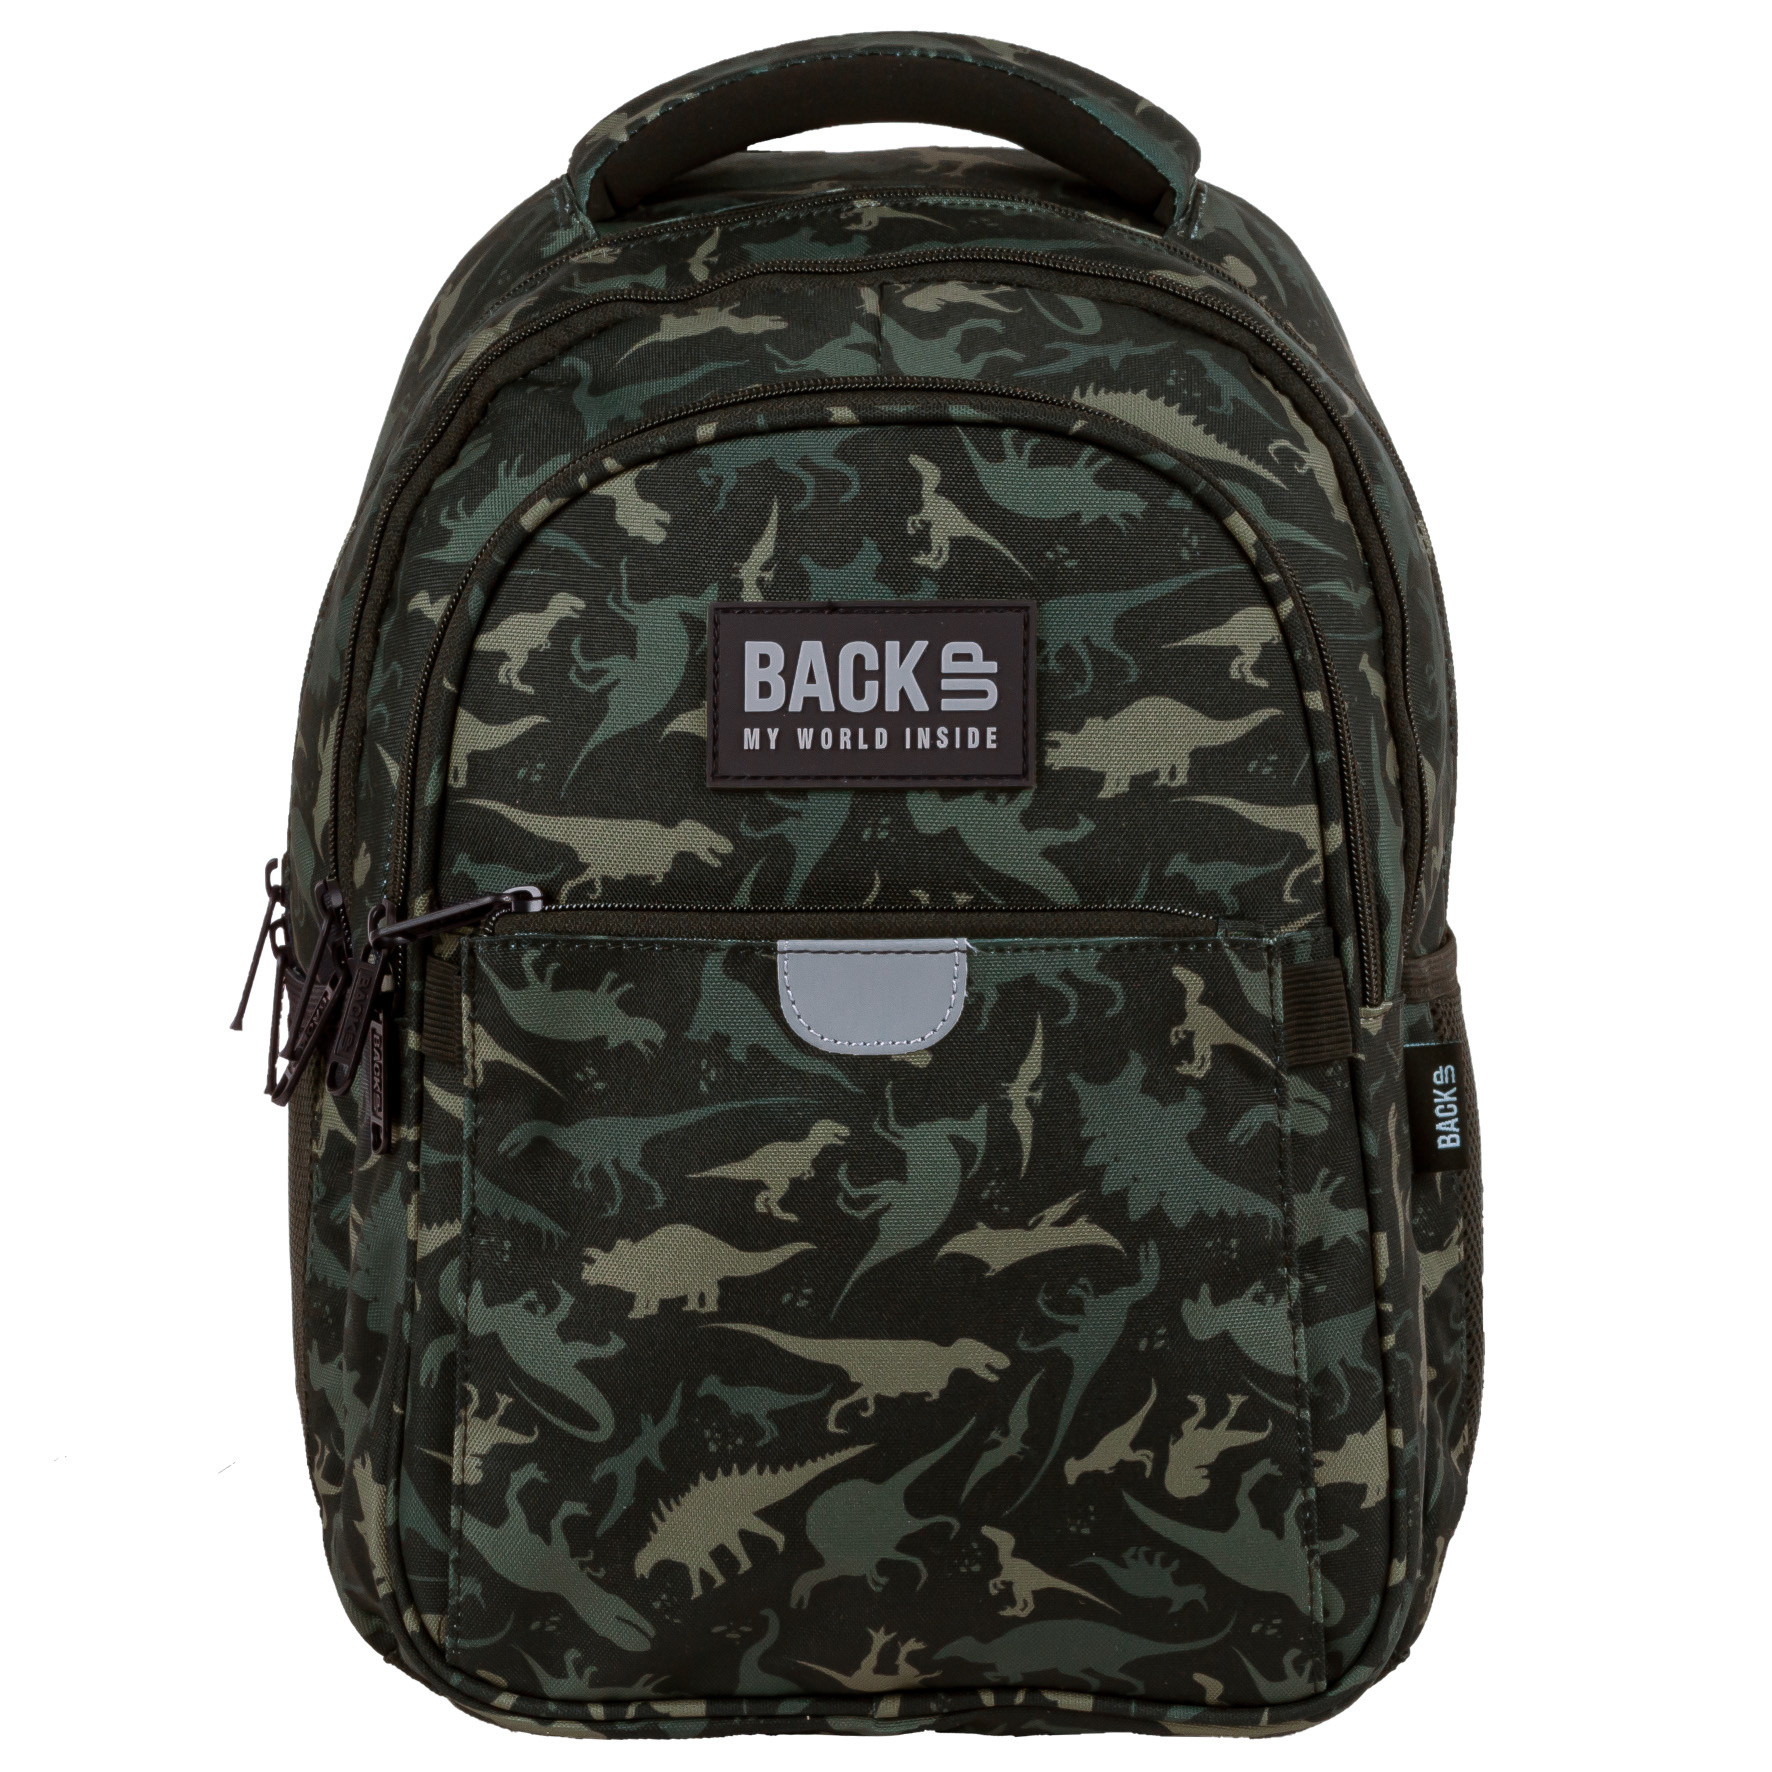 BackUP Backpack Camouflage Dino - 39 x 27 x 20 cm - Polyester